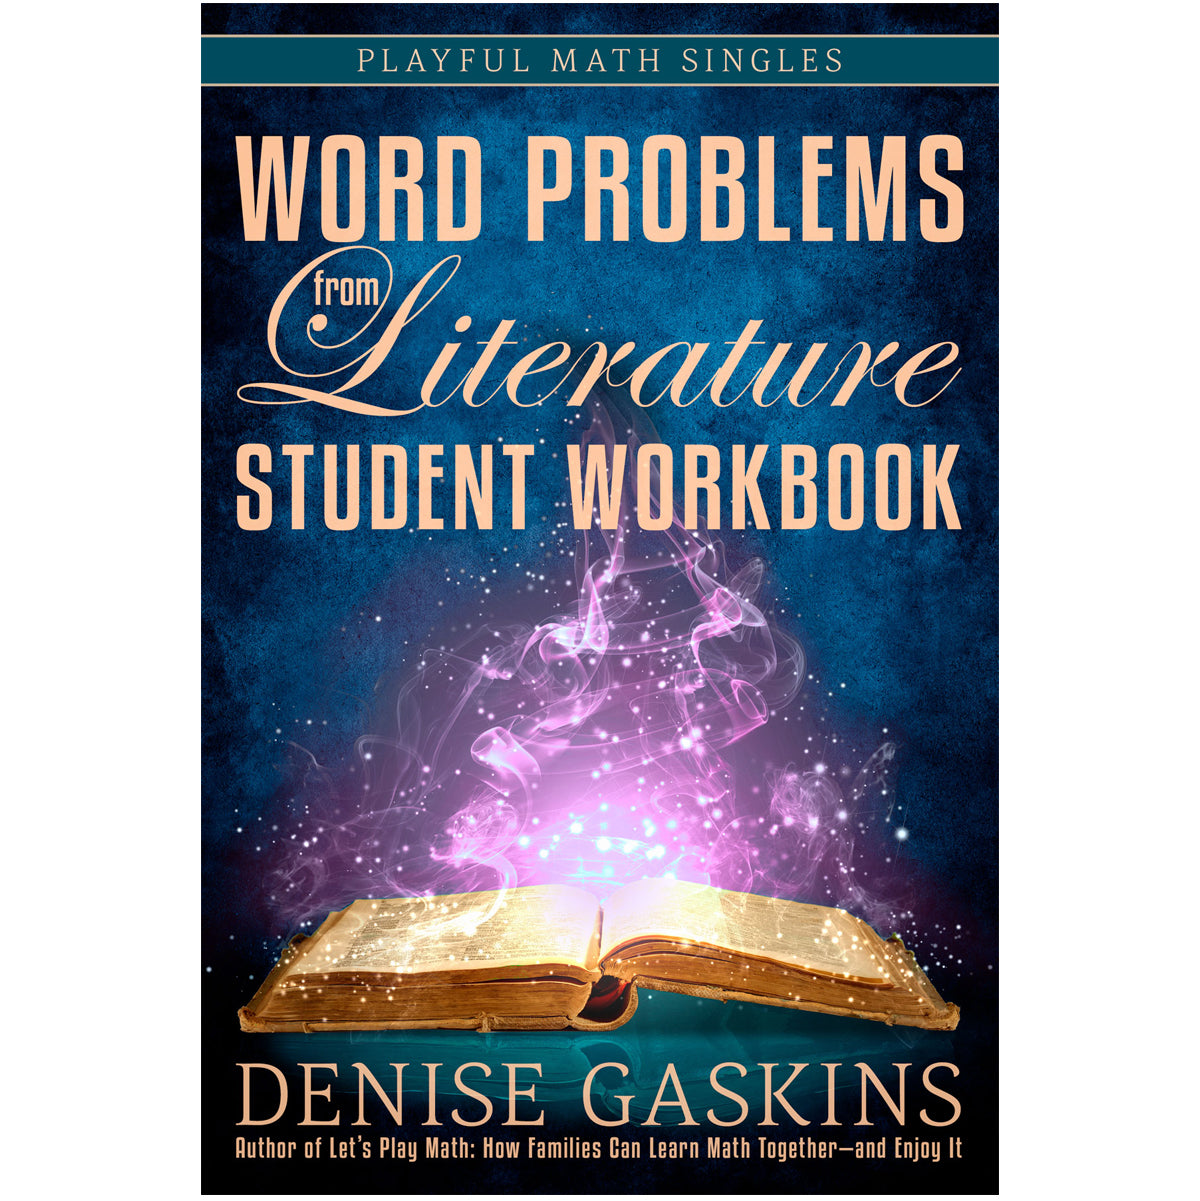 Word Problems from Literature student workbook by Denise Gaskins